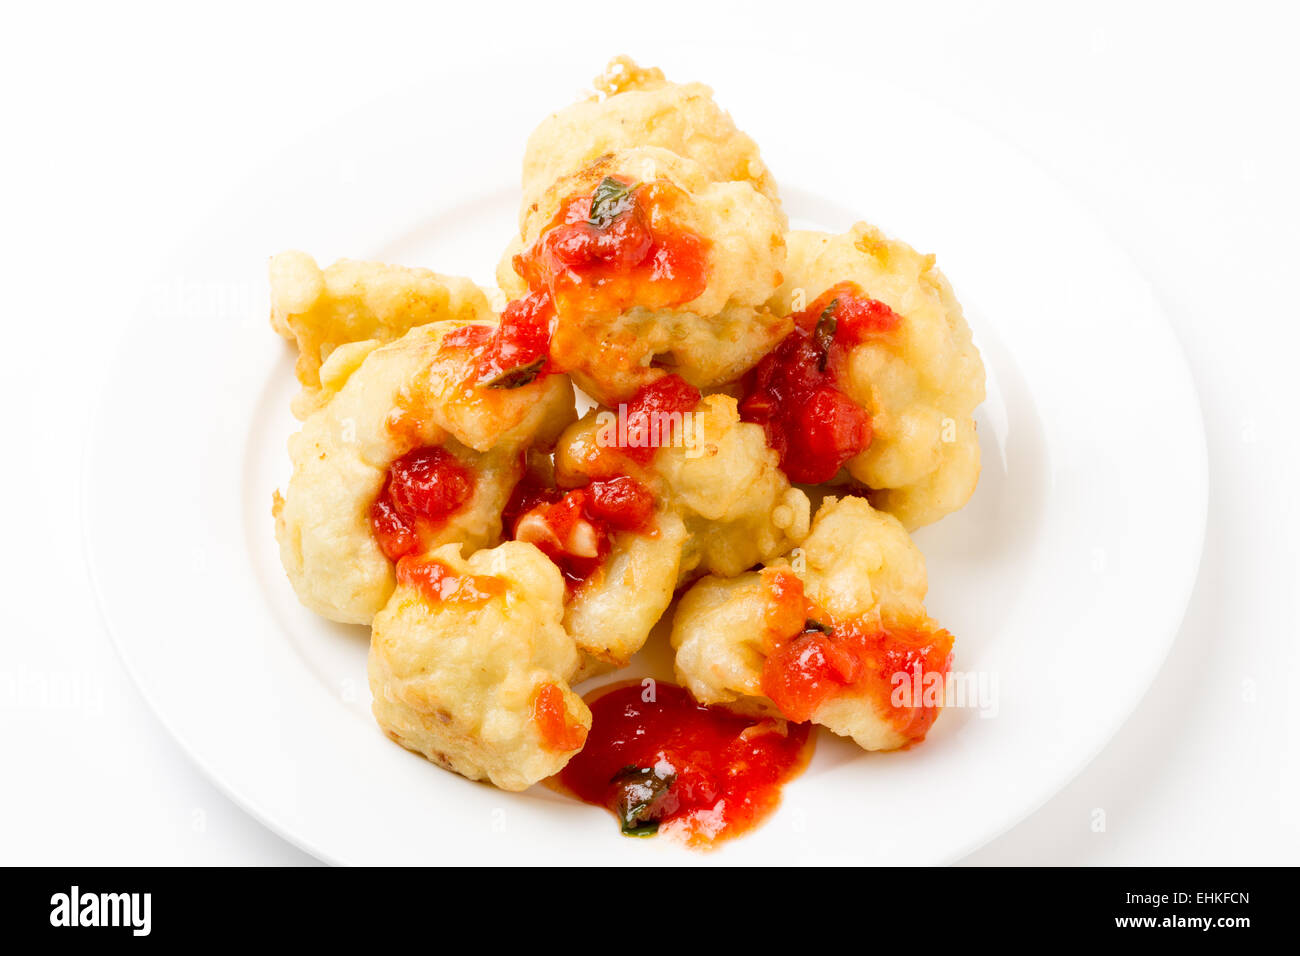 Florets of cauliflower parboiled then dipped in batter and deep fried Stock Photo